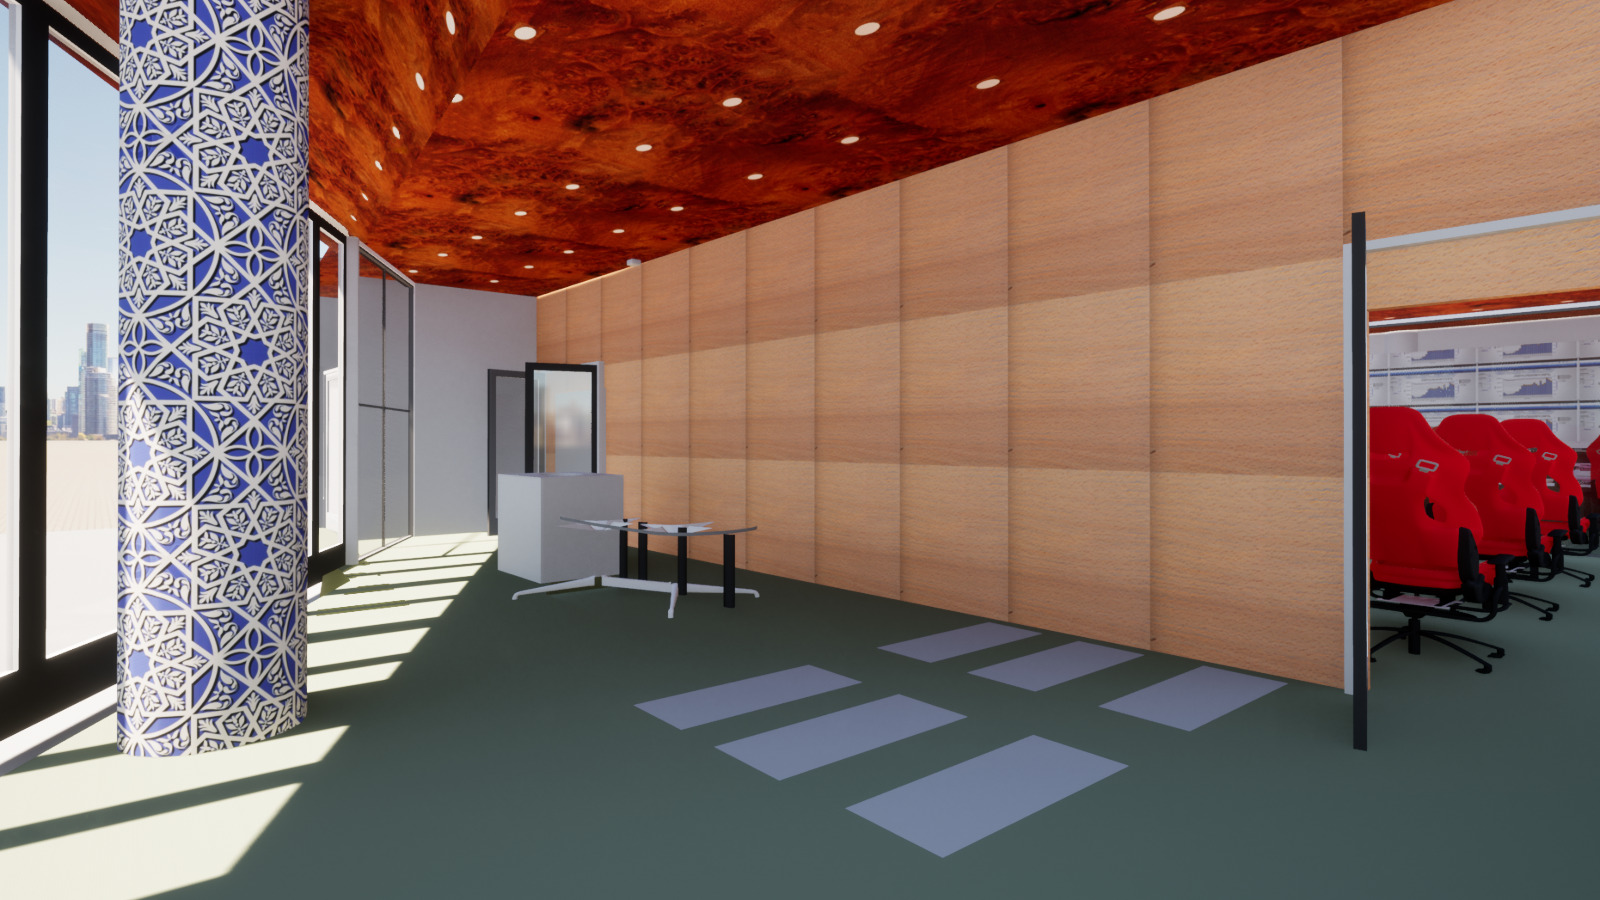 3D concept rendering of the lobby for a proposed network operations center for Dubai. From right foreground to distant center is a wall made from decorative panels with a doorway to the main facility. To the left, sunlight streams through a glass wall approximately along the line of sight. Round support columns along the near side of the glass wall are decorated in the style of traditional Islamic geometric art.